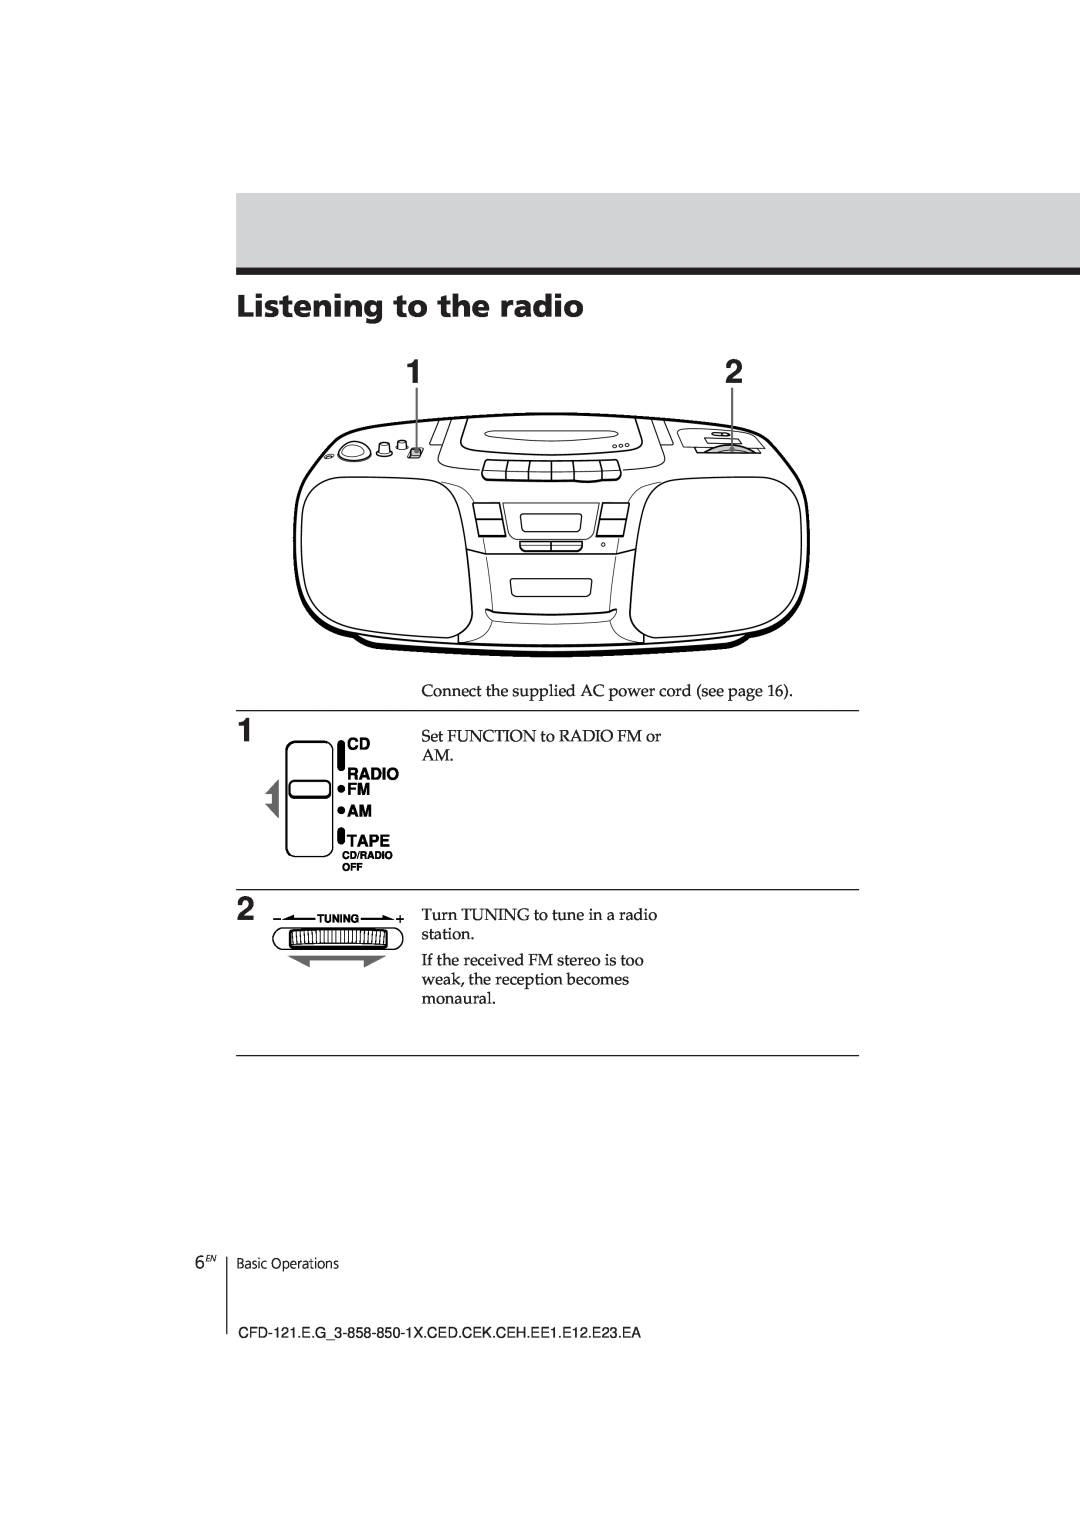 Sony CFD-121 Listening to the radio, Connect the supplied AC power cord see page, Set FUNCTION to RADIO FM or AM 